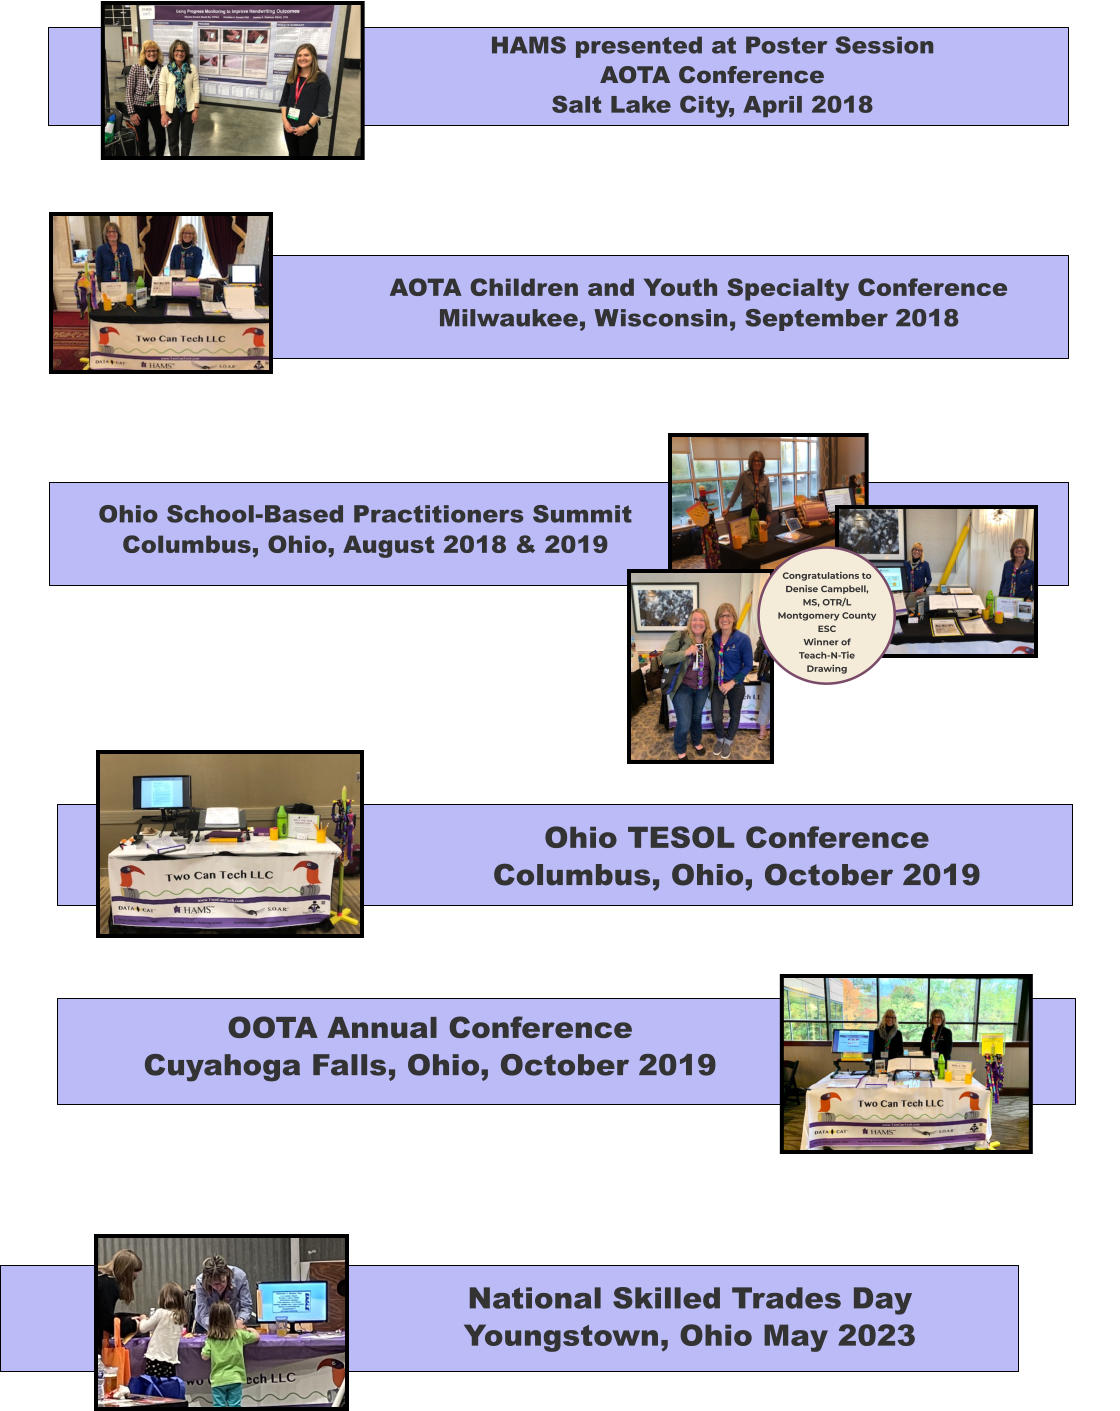 HAMS presented at Poster Session AOTA Conference Salt Lake City, April 2018 AOTA Children and Youth Specialty Conference Milwaukee, Wisconsin, September 2018   Ohio School-Based Practitioners Summit Columbus, Ohio, August 2018 & 2019 Ohio TESOL Conference Columbus, Ohio, October 2019 Congratulations to  Denise Campbell,  MS, OTR/L Montgomery County  ESC Winner of  Teach-N-Tie Drawing OOTA Annual Conference Cuyahoga Falls, Ohio, October 2019   National Skilled Trades Day Youngstown, Ohio May 2023